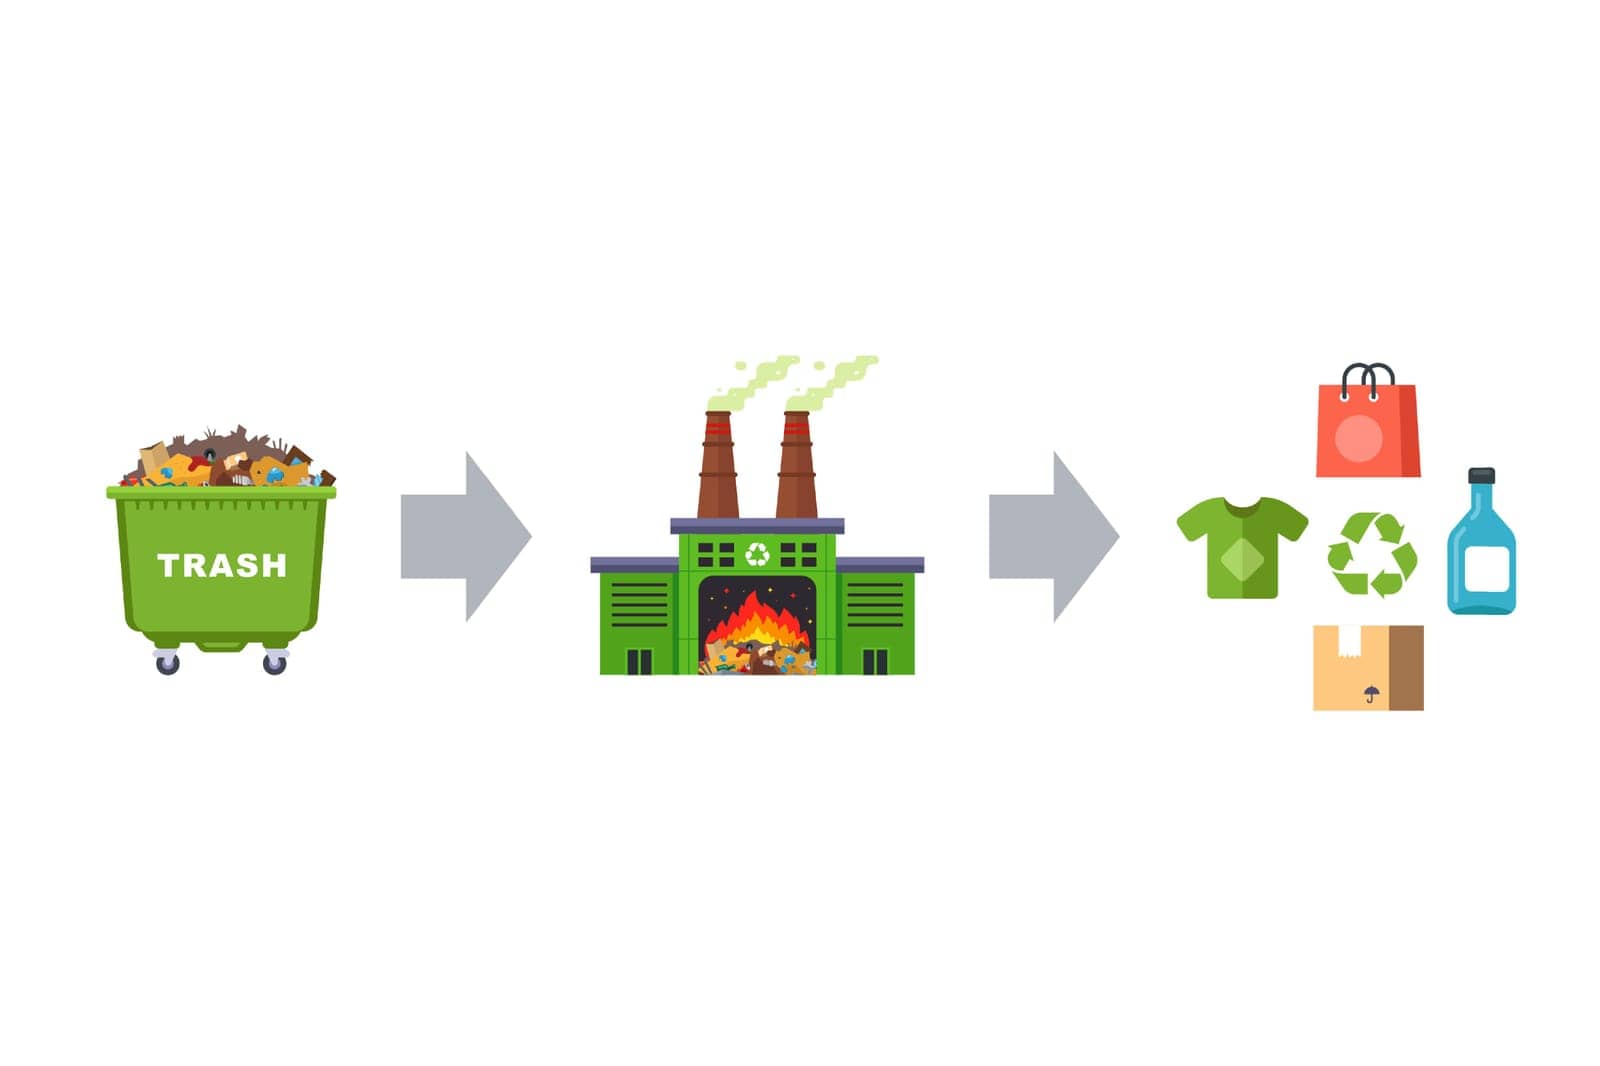 scheme for recycling waste into consumer goods. by PlutusART